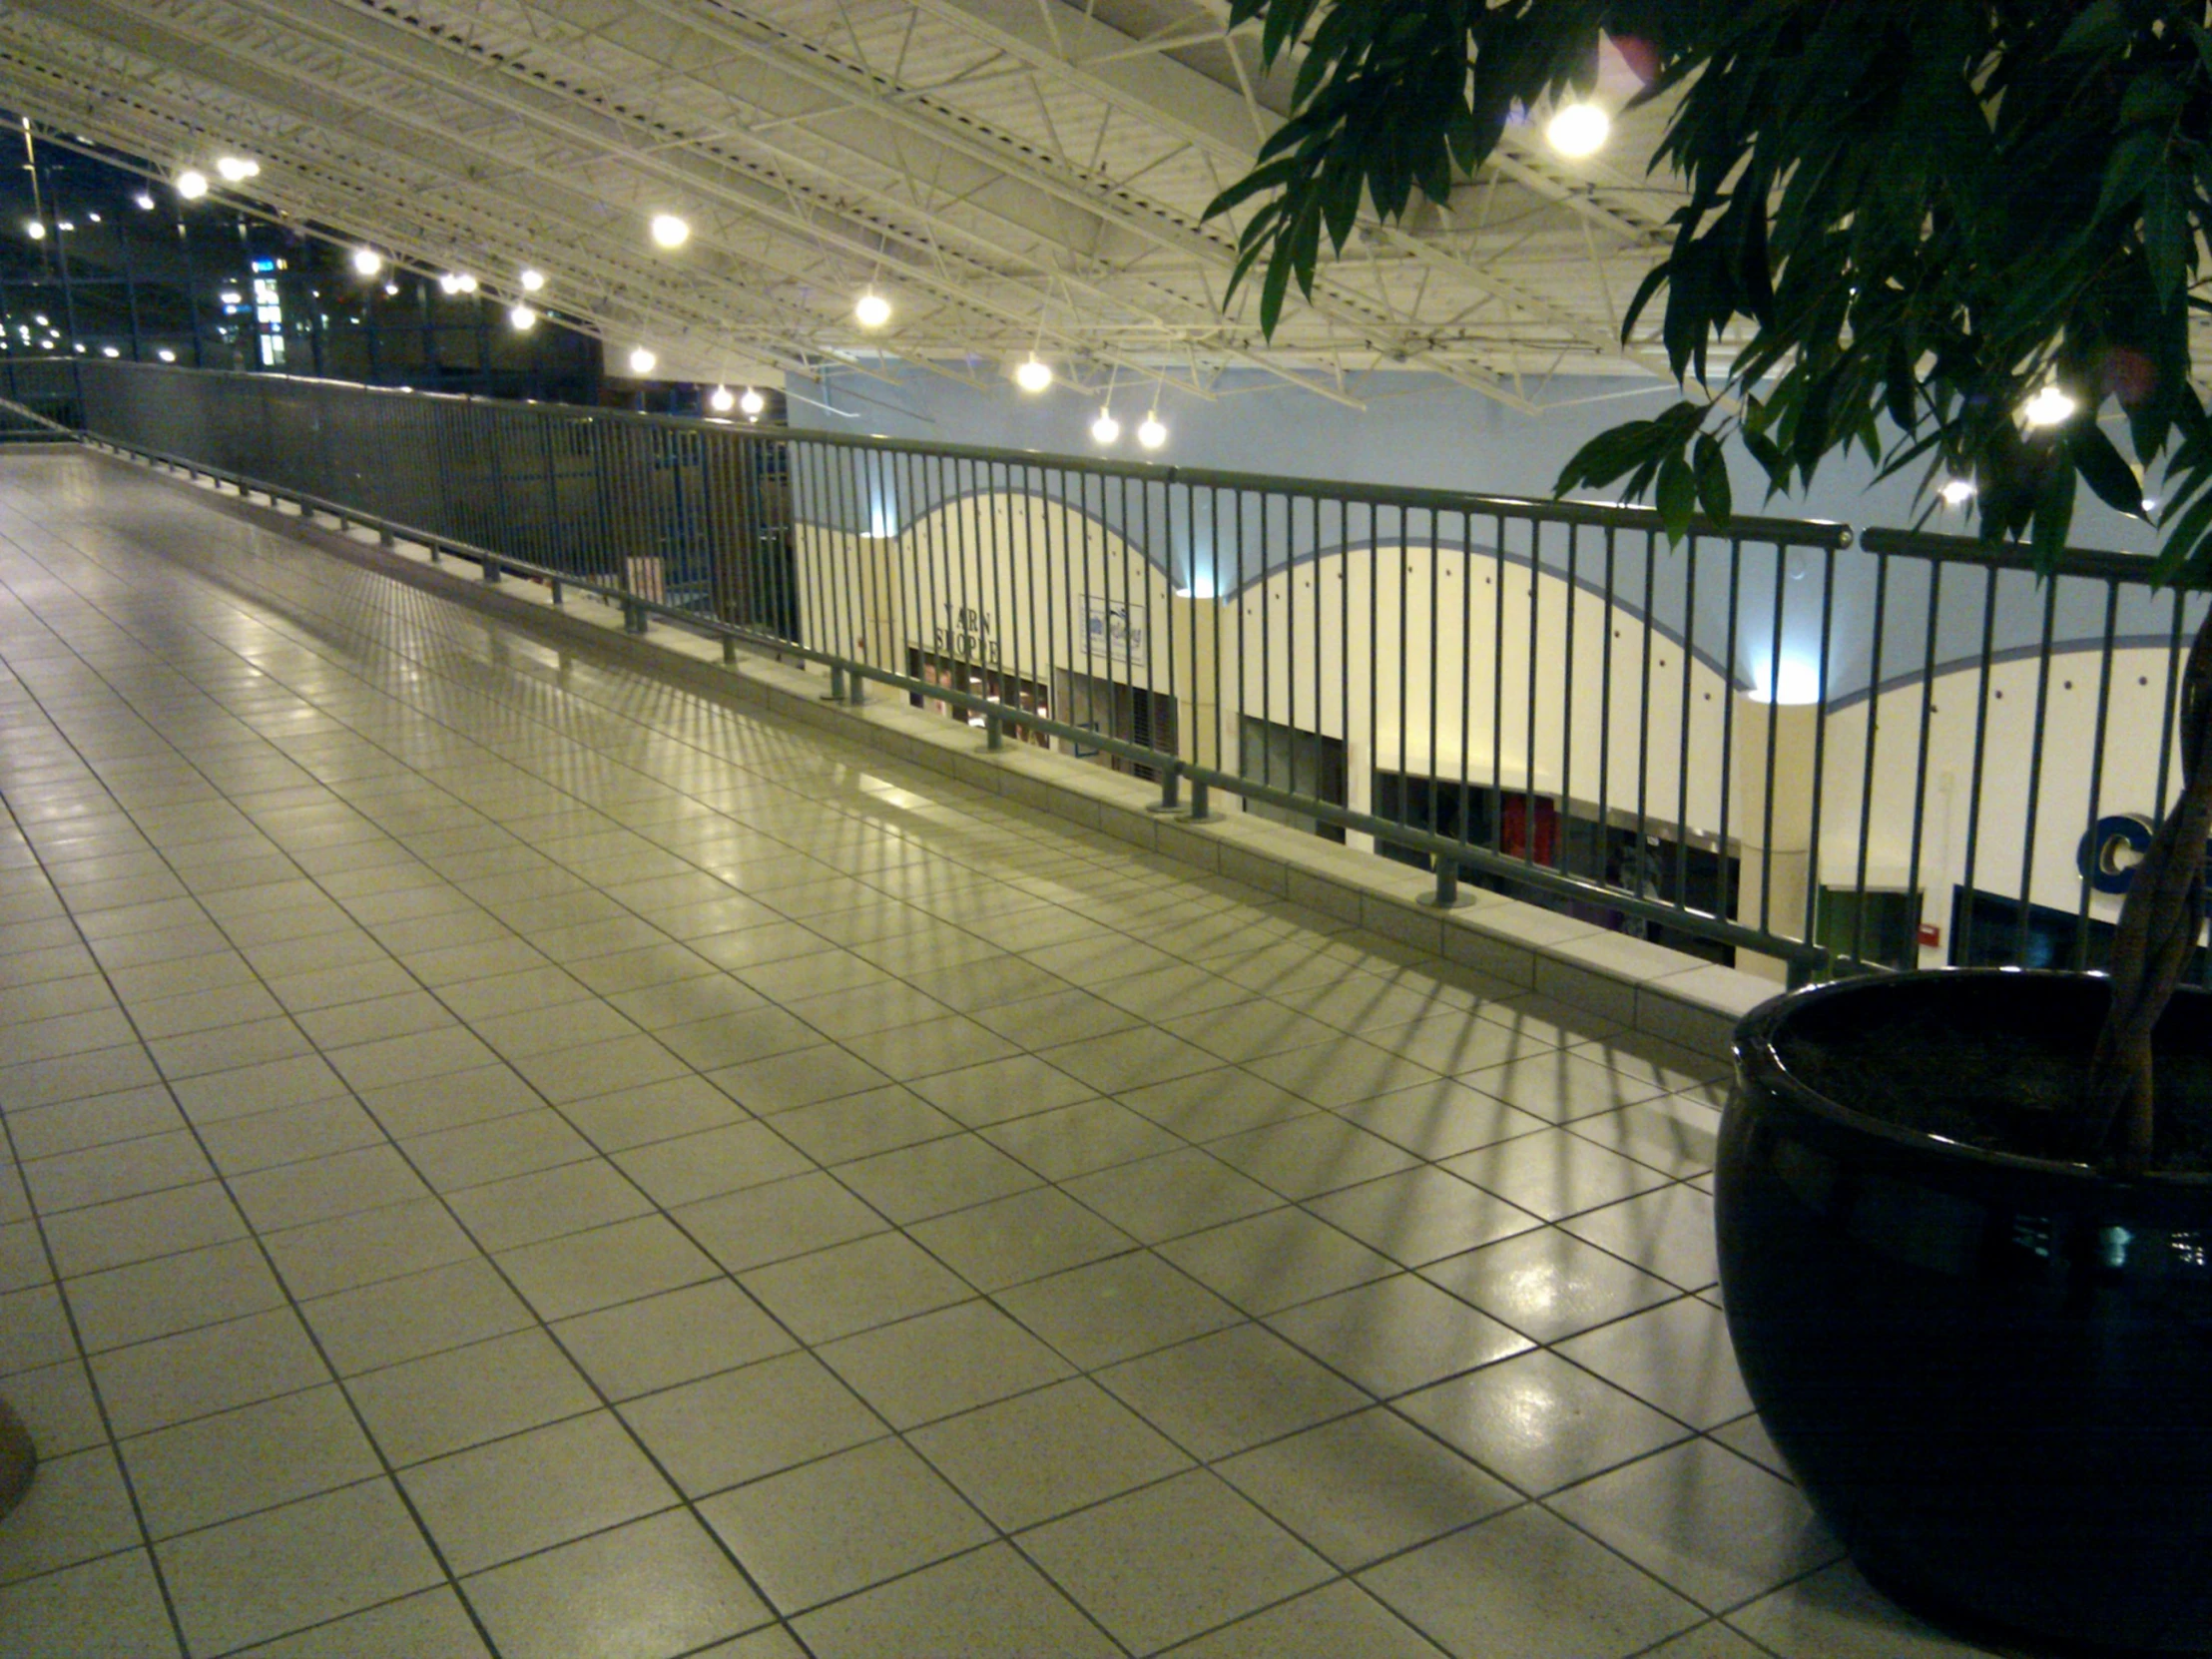 the empty terminal is set up for passengers